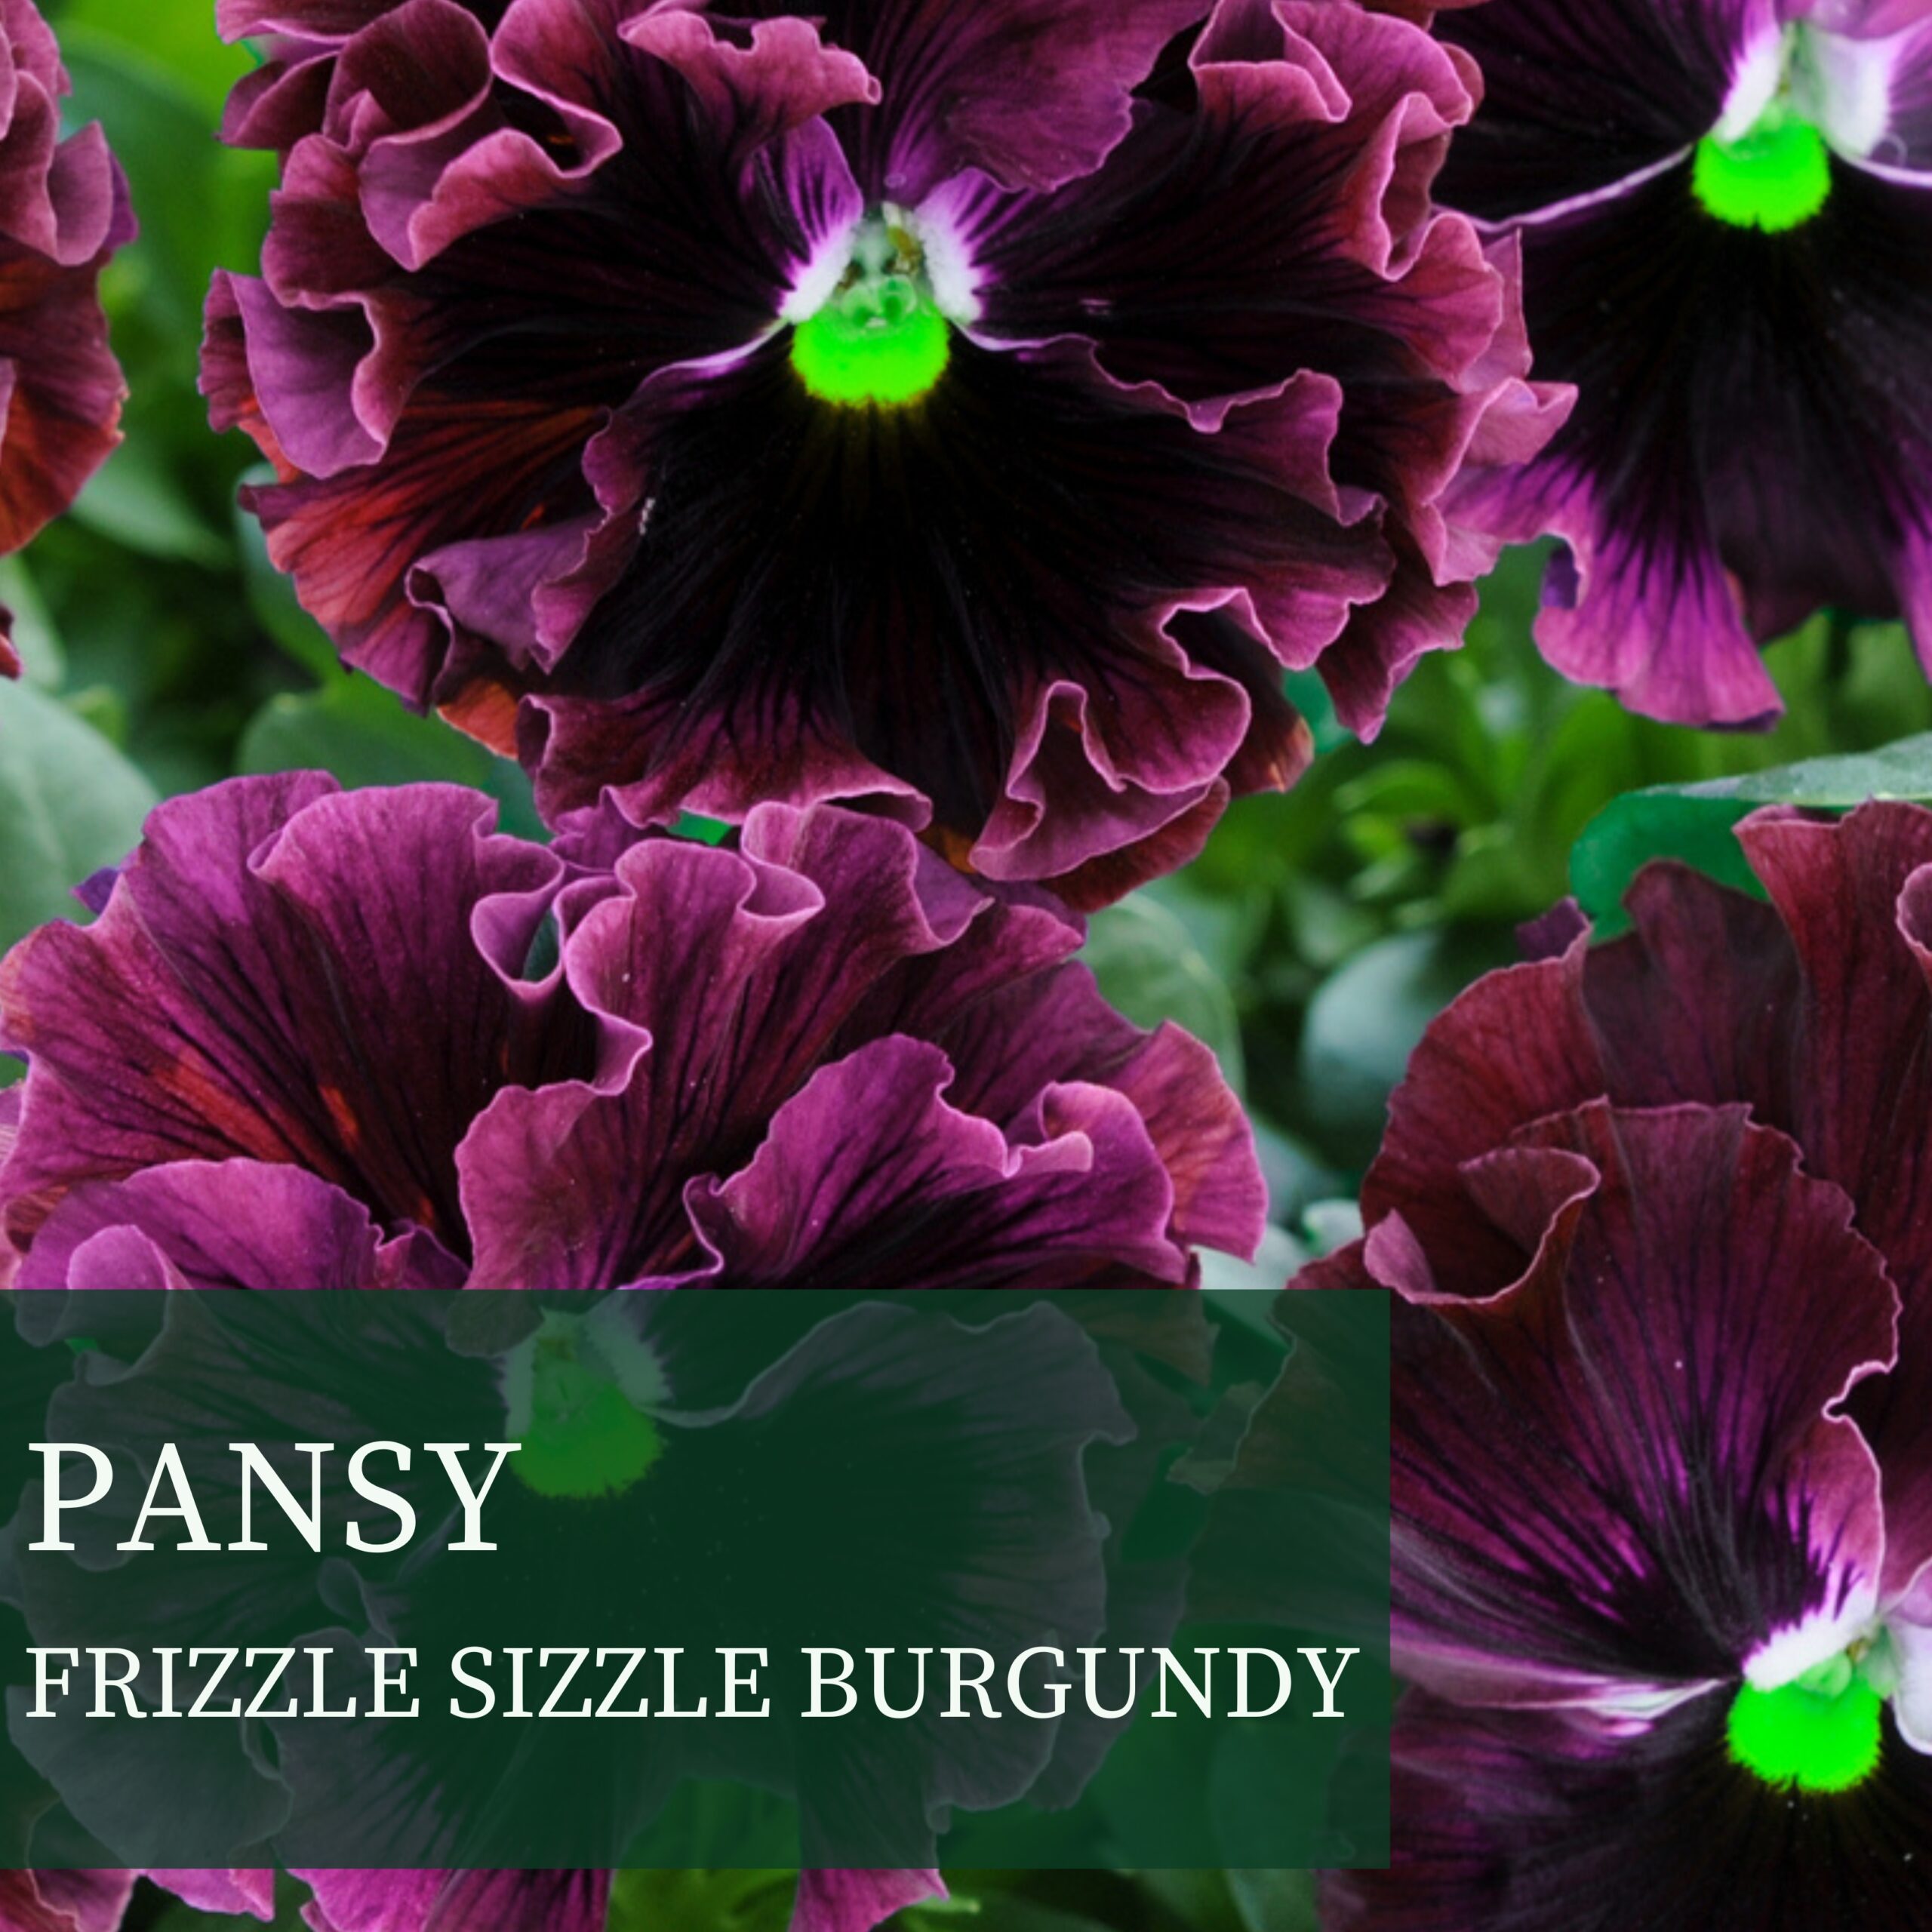 PANSY FRIZZLE SIZZLE BURGUNDY